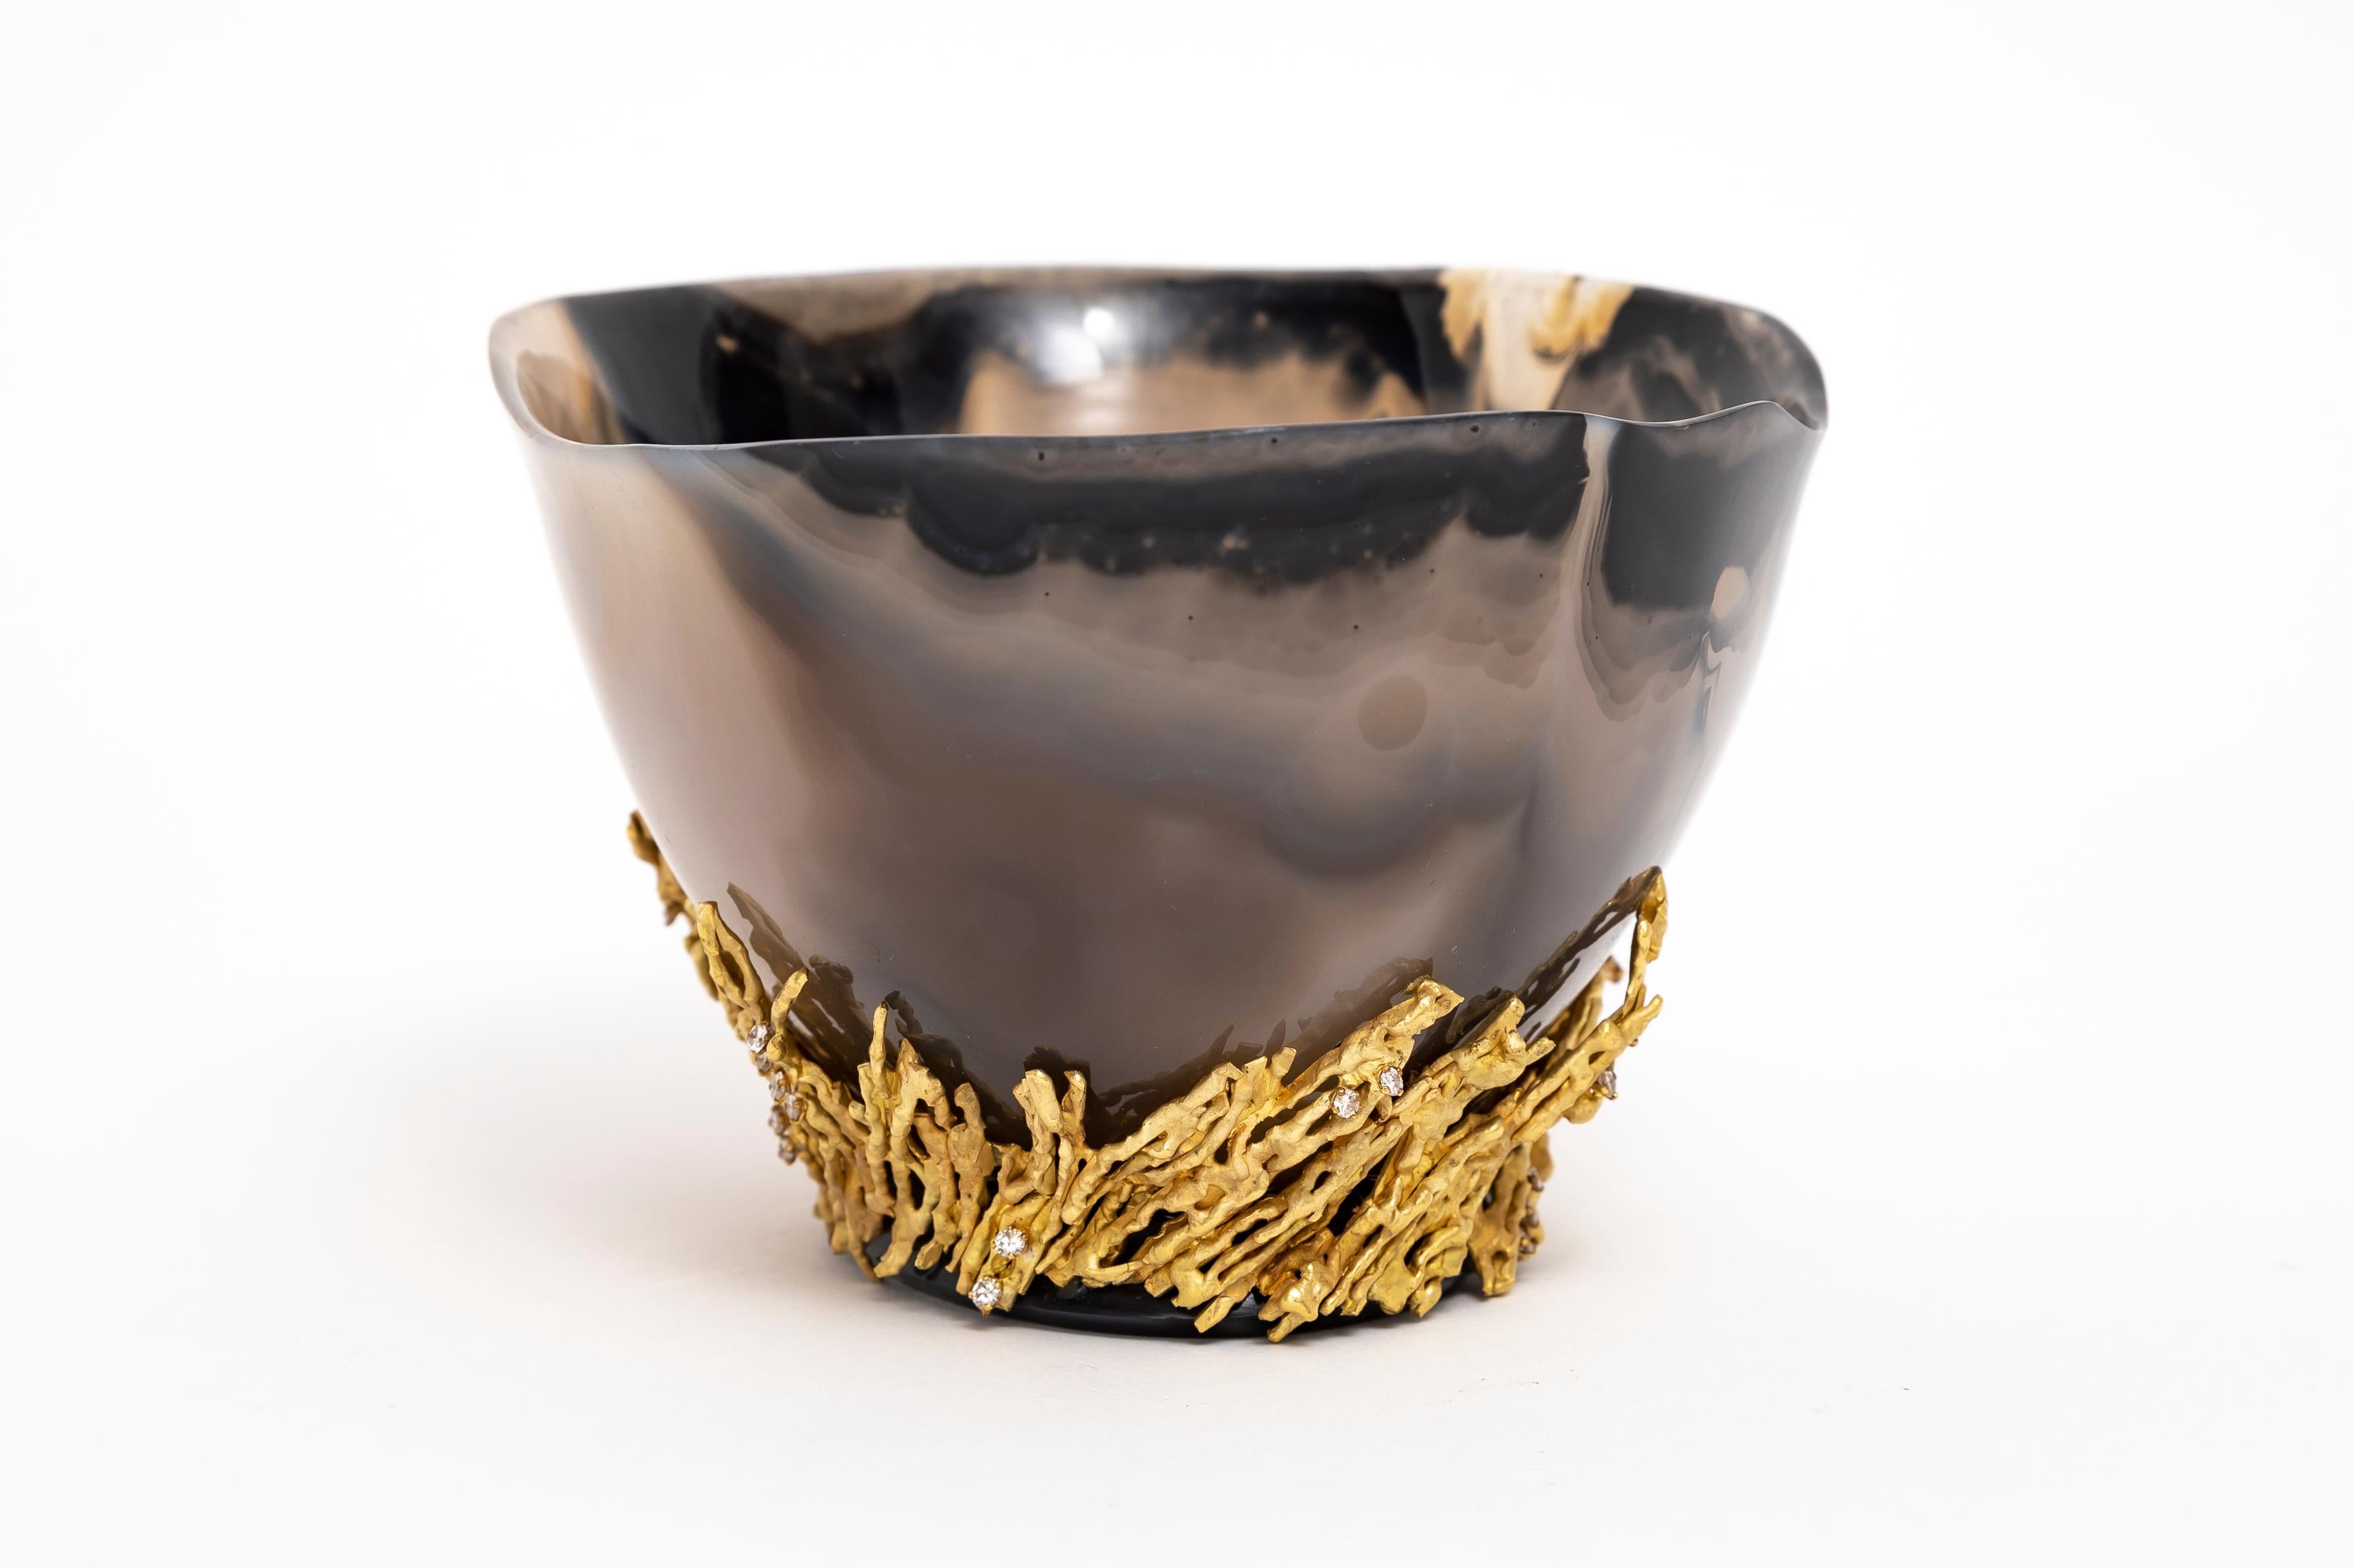 Hand-Carved An Incredible Chaumet Paris Gold & Diamond Mounted Carved Agate Bowl For Sale